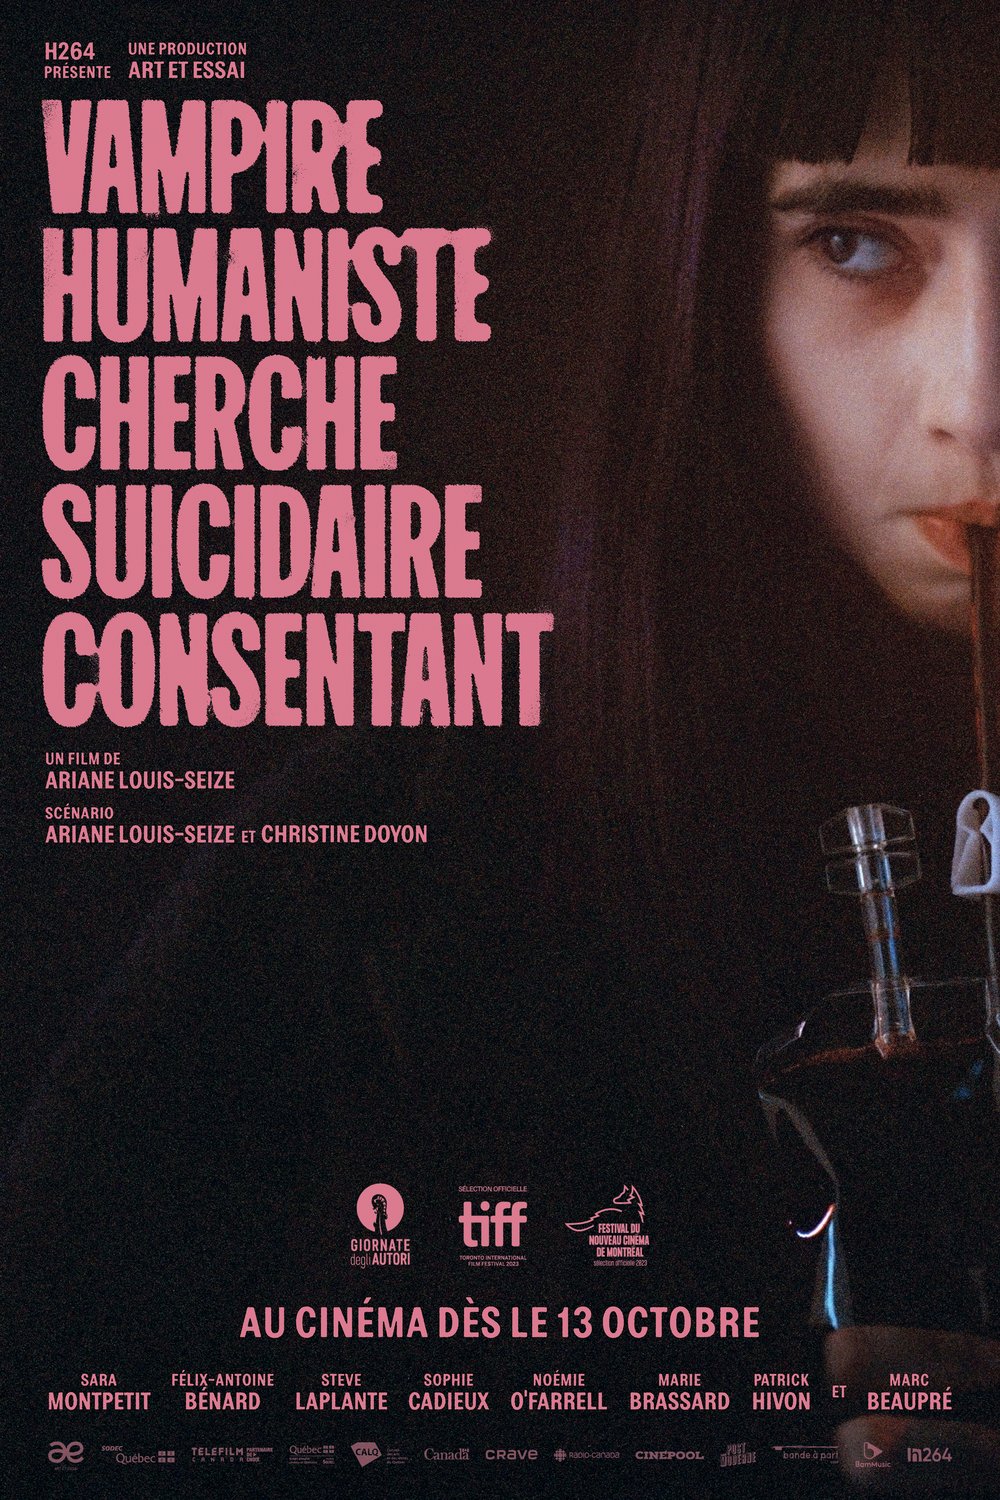 Poster of the movie Humanist Vampire Seeking Consenting Suicidal Person